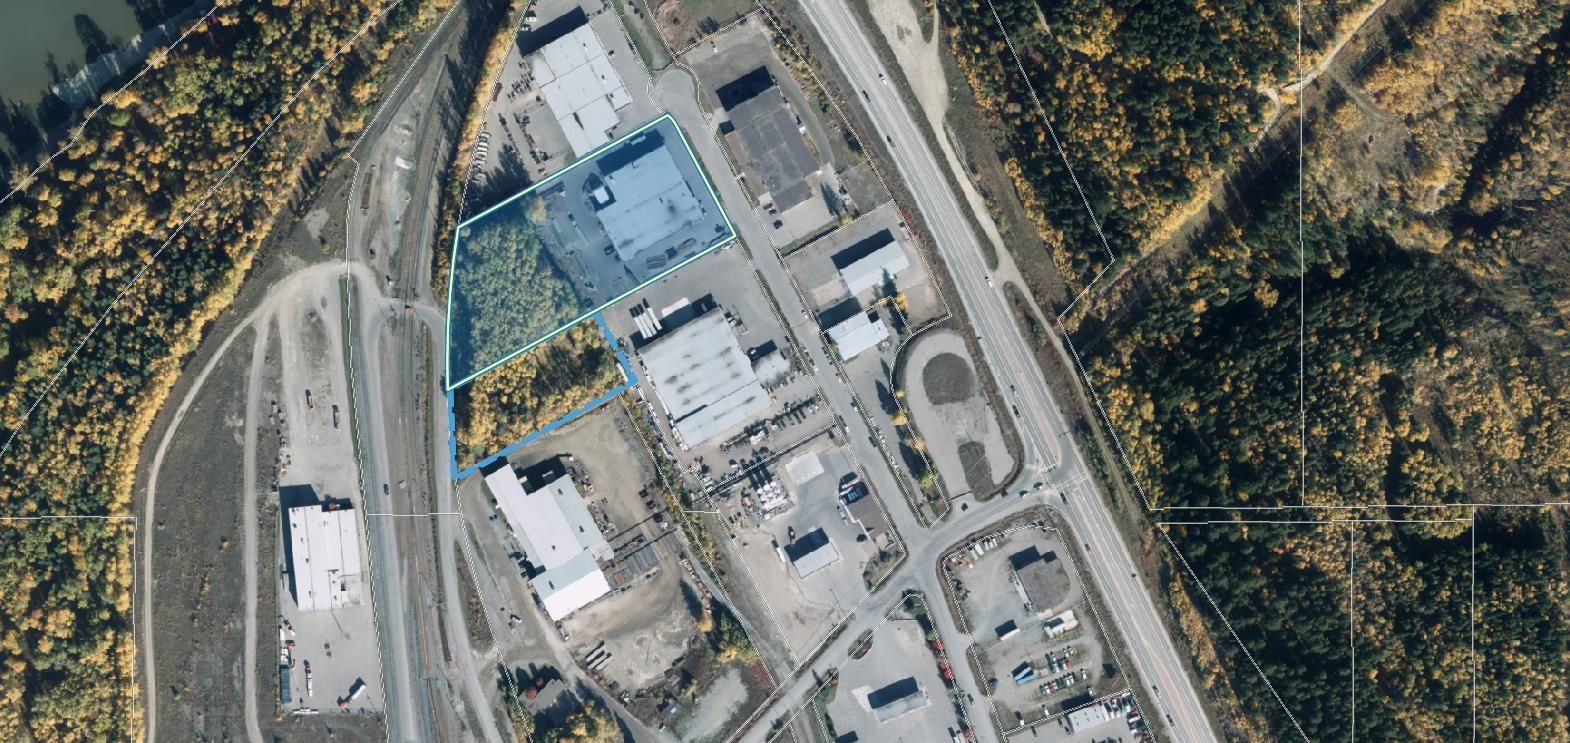 Main Photo: 922 GREAT Street in Prince George: BCR Industrial Industrial for lease (PG City South East)  : MLS®# C8051873